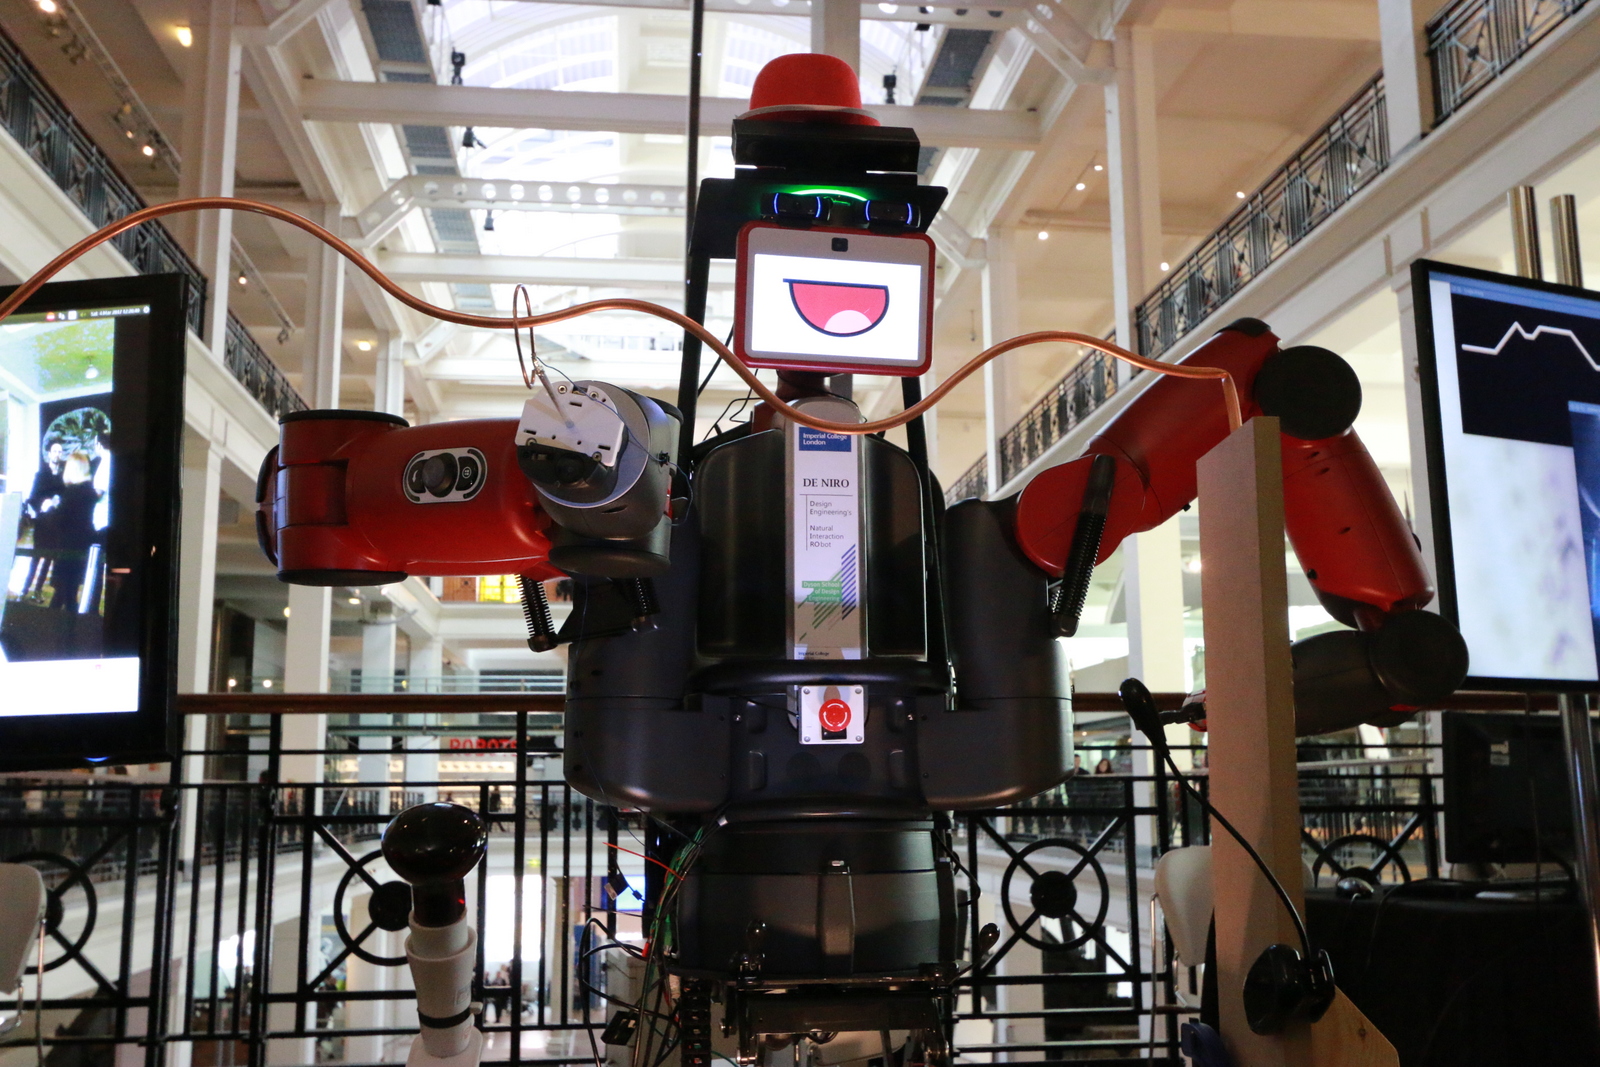 Robot DE NIRO from Imperial College 